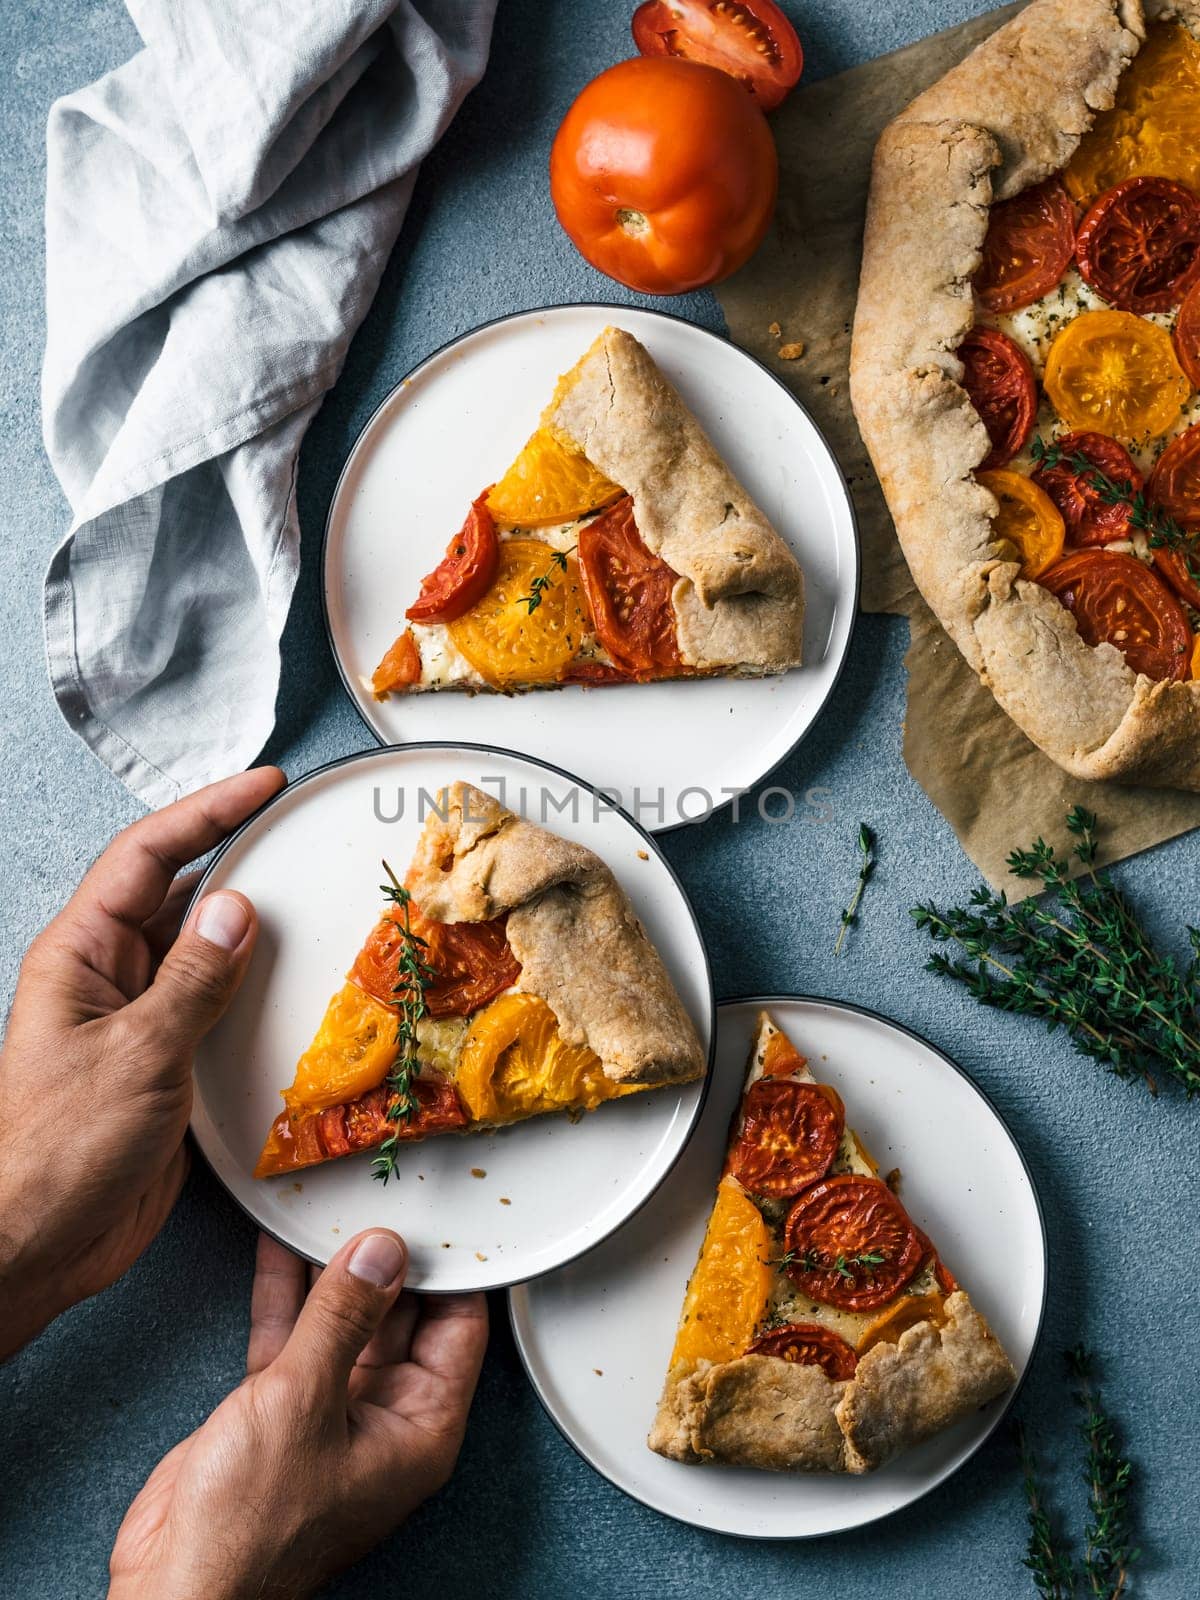 Savory fresh homemade tomato tart or galette.Hands takes piece of pie.Ideas and recipes healthy lunch,appetiezer-whole wheat or rye-wheat pie with tomatoes,cheese.Harvest tomatoes.Top view.Vertical